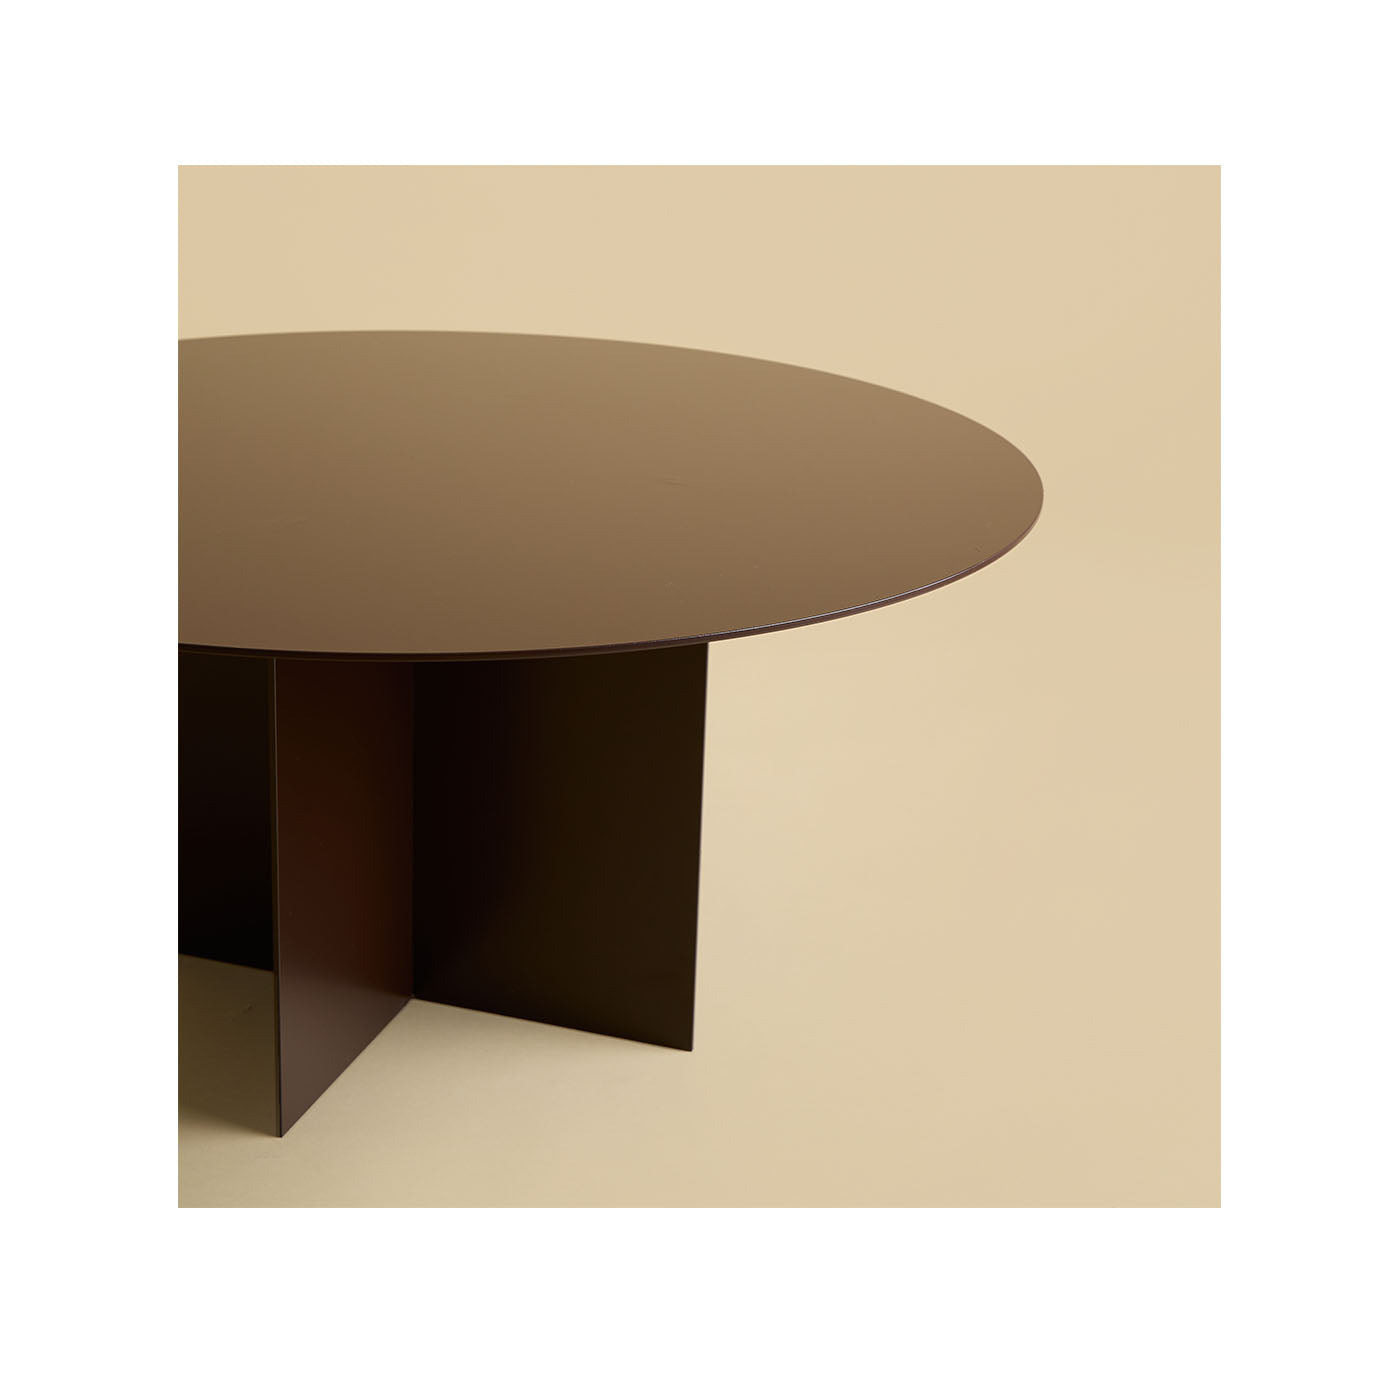 Fire Chocolate Brown Coffee Table - Alternative view 3